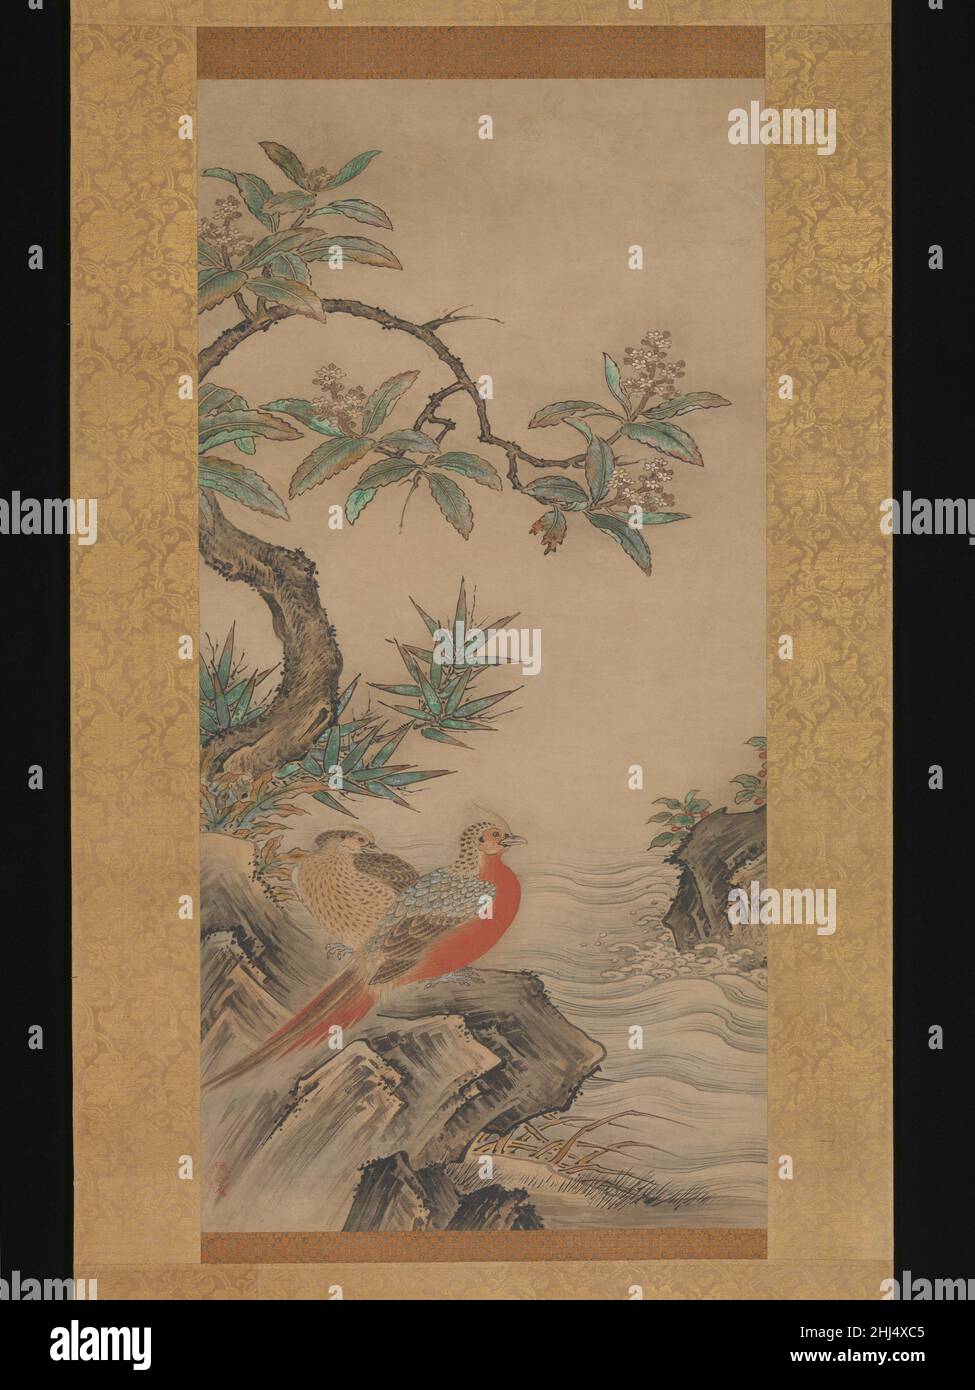 Pheasants among Trees: Flowers of the Four Seasons probably 1560s Kano Shōei Paired pheasants—symbols of imperial elegance—pose amid foliage representing all four seasons. Dandelions and violets in the right scroll suggest spring while a summertime azalea blooms nearby. The left scroll features an autumnal loquat and drying reeds alongside winter’s red-berried spear flowers. The pheasants’ plumage is highlighted in gold, befitting birds popularly associated with the deity Amaterasu, putative ancestress of the imperial family. Given this symbolic connection, this diptych may have been commissio Stock Photo